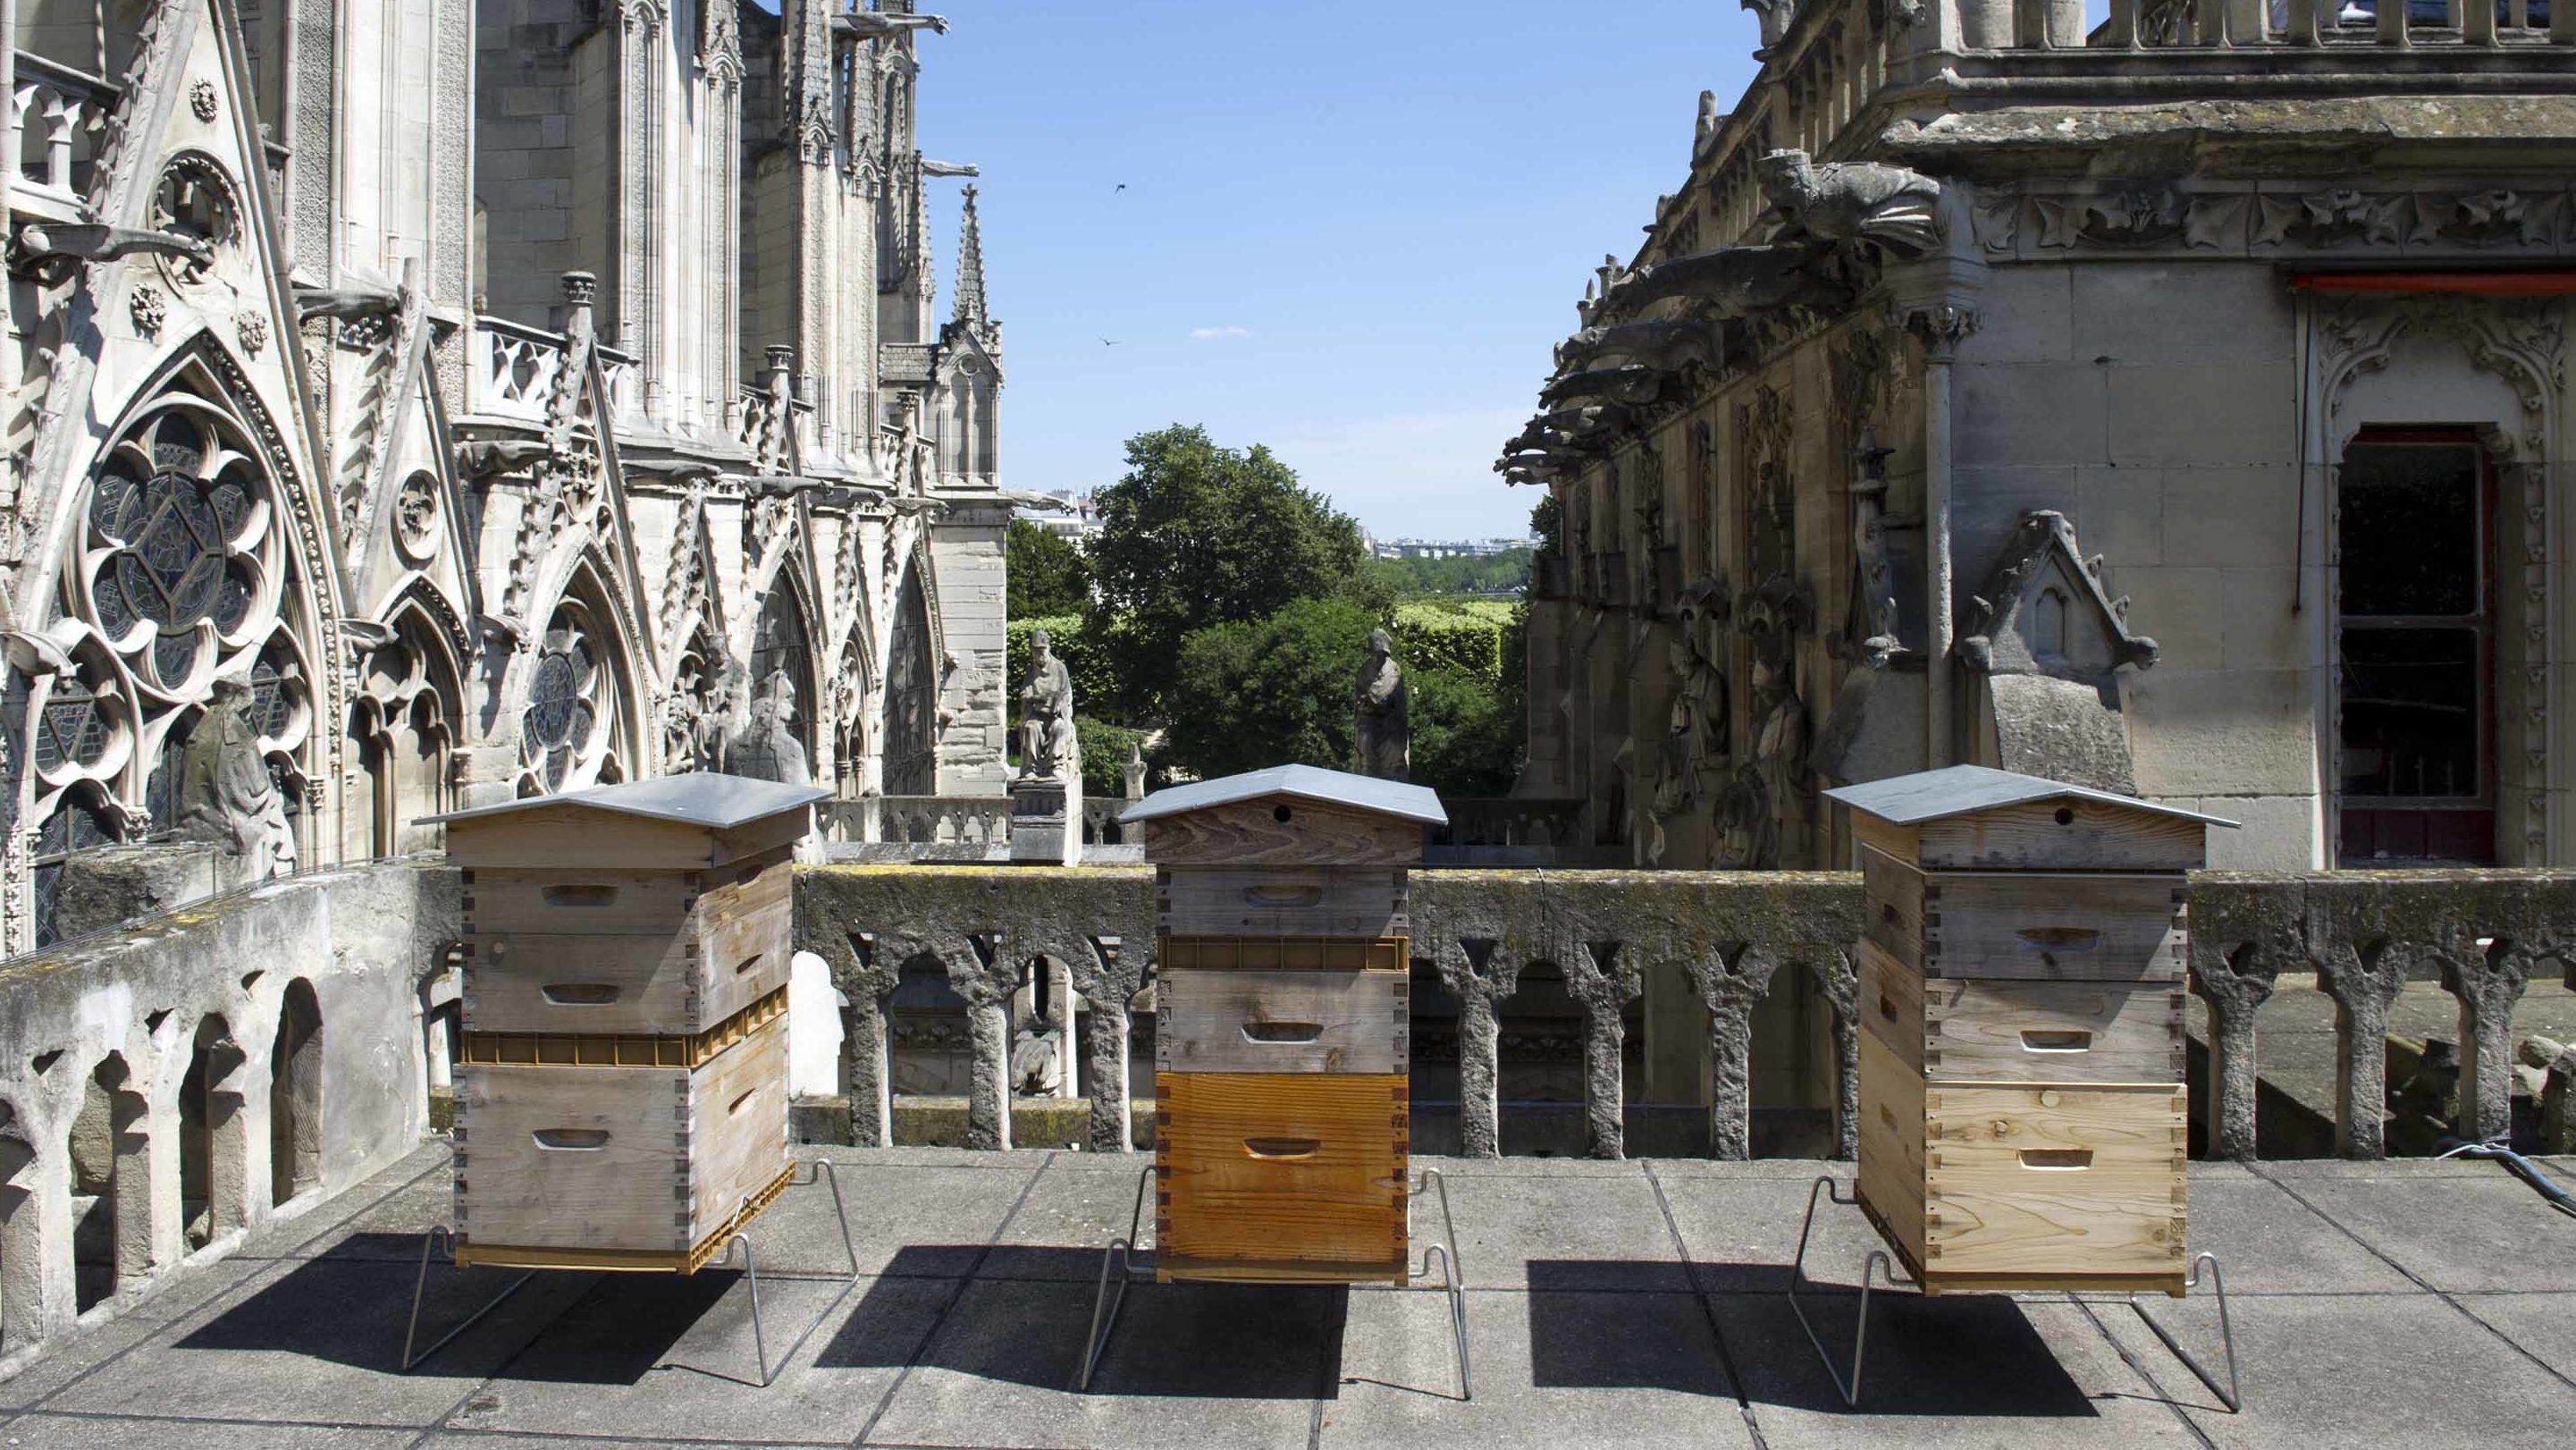 The beekeeper Nicolas Geant settled three hives on the roof of the sacristy of Notre Dame.